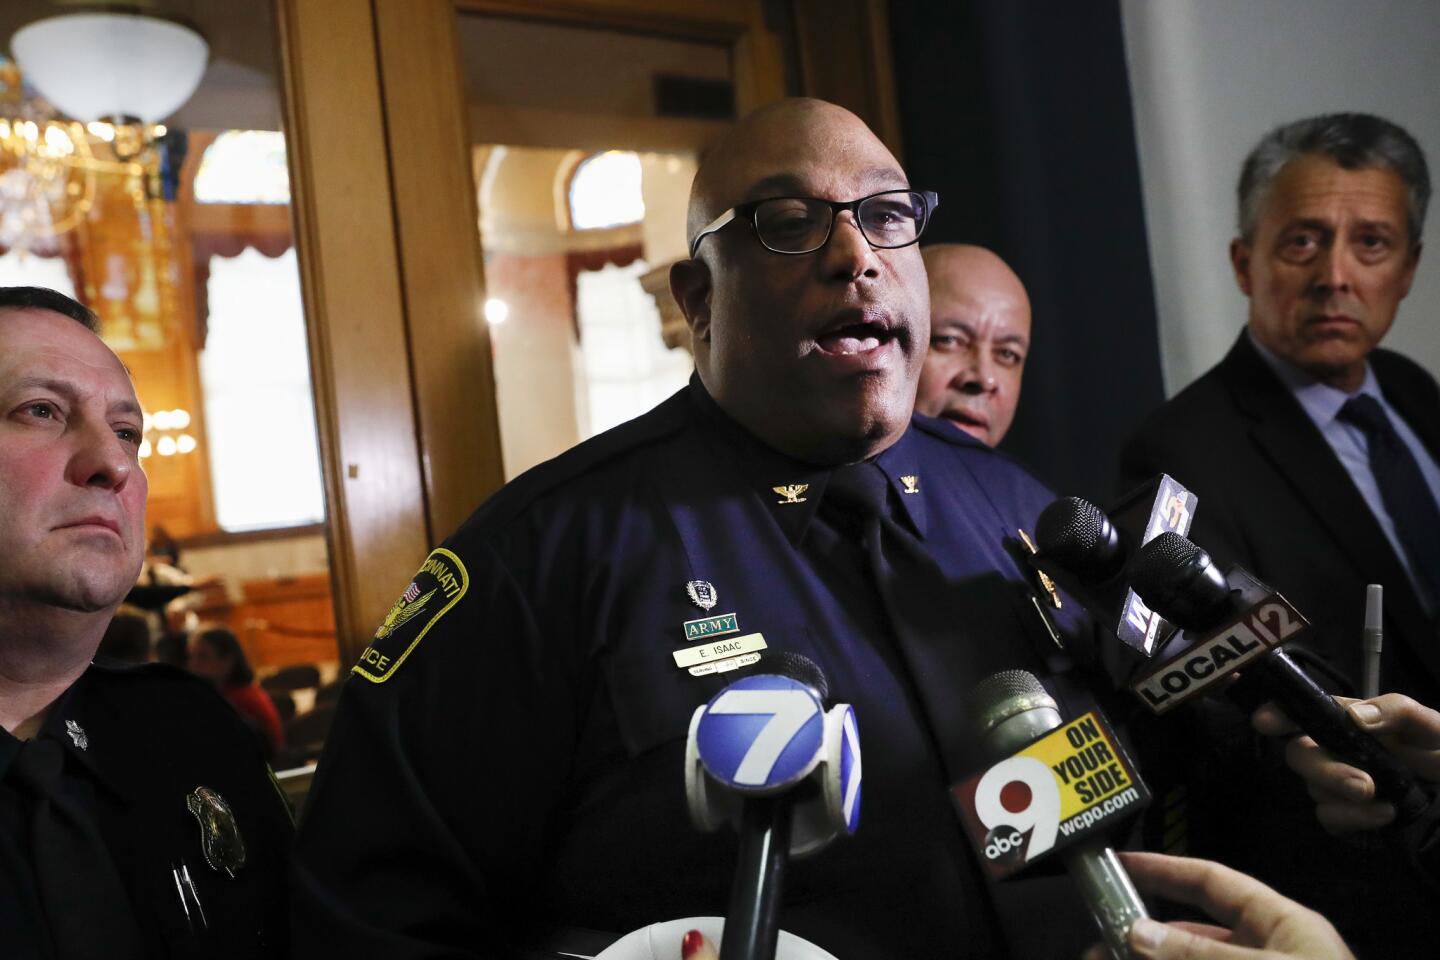 Cincinnati police chief Eliot Isaac said it doesn't appear there is any video footage of the deadly nightclub shooting.